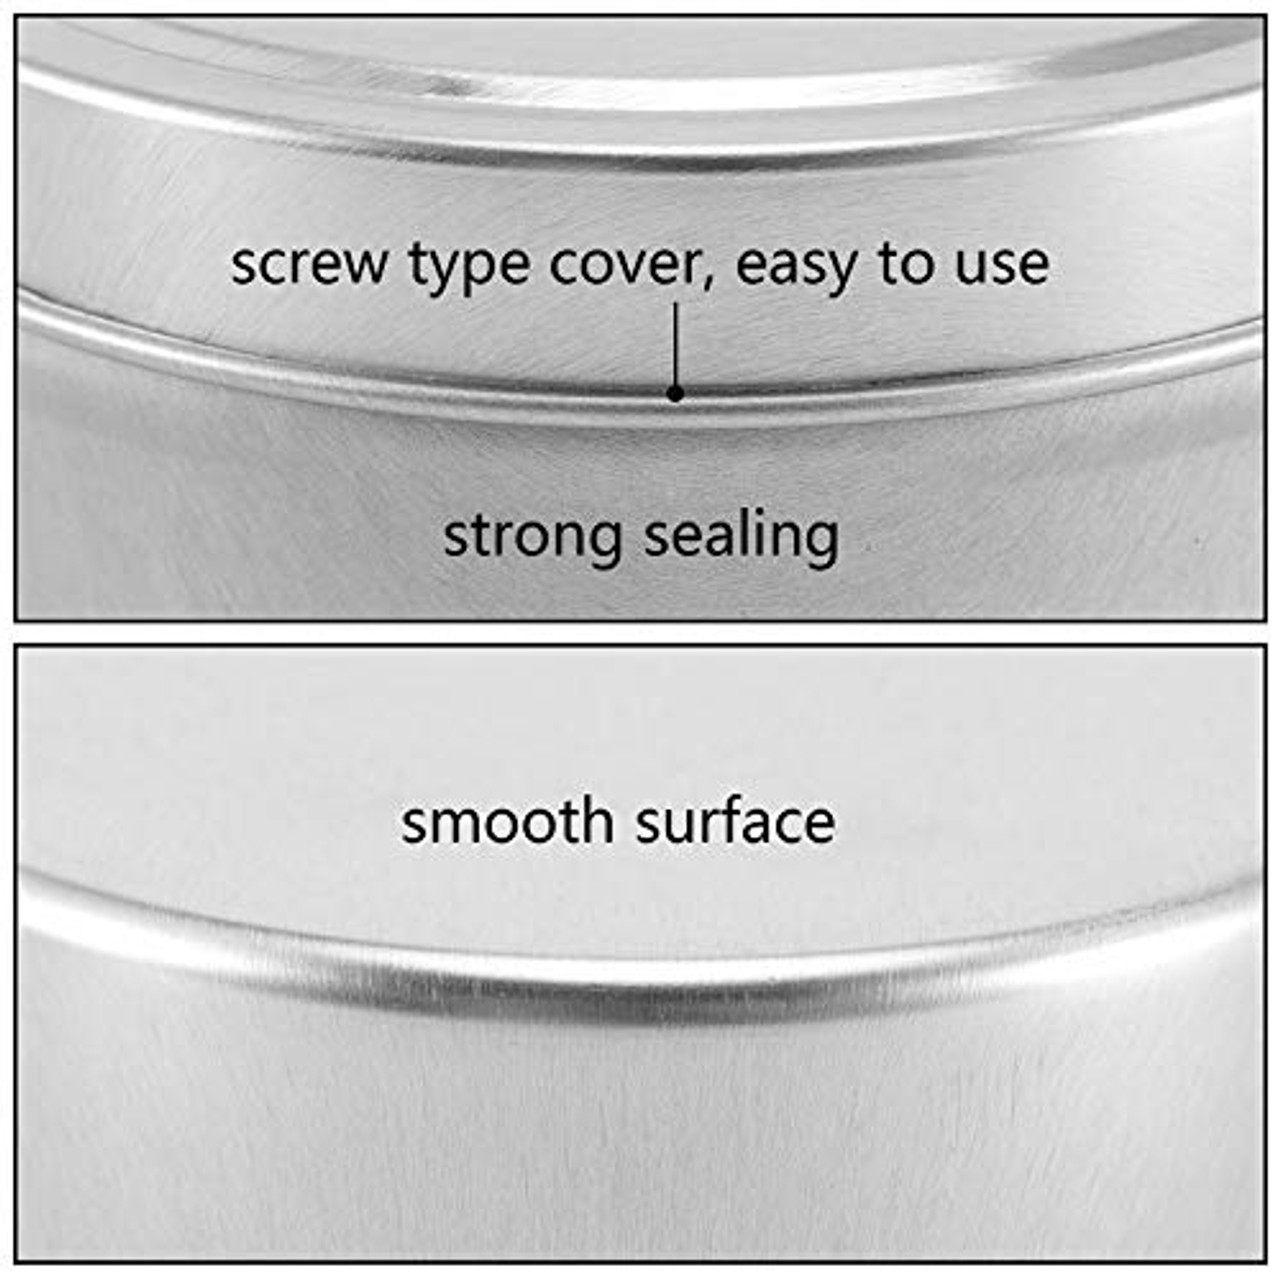 ZOENHOU 28 Pack 4 Oz Candle Tins, Round Empty Metal Tins with Lids,  Portable Metal Storage